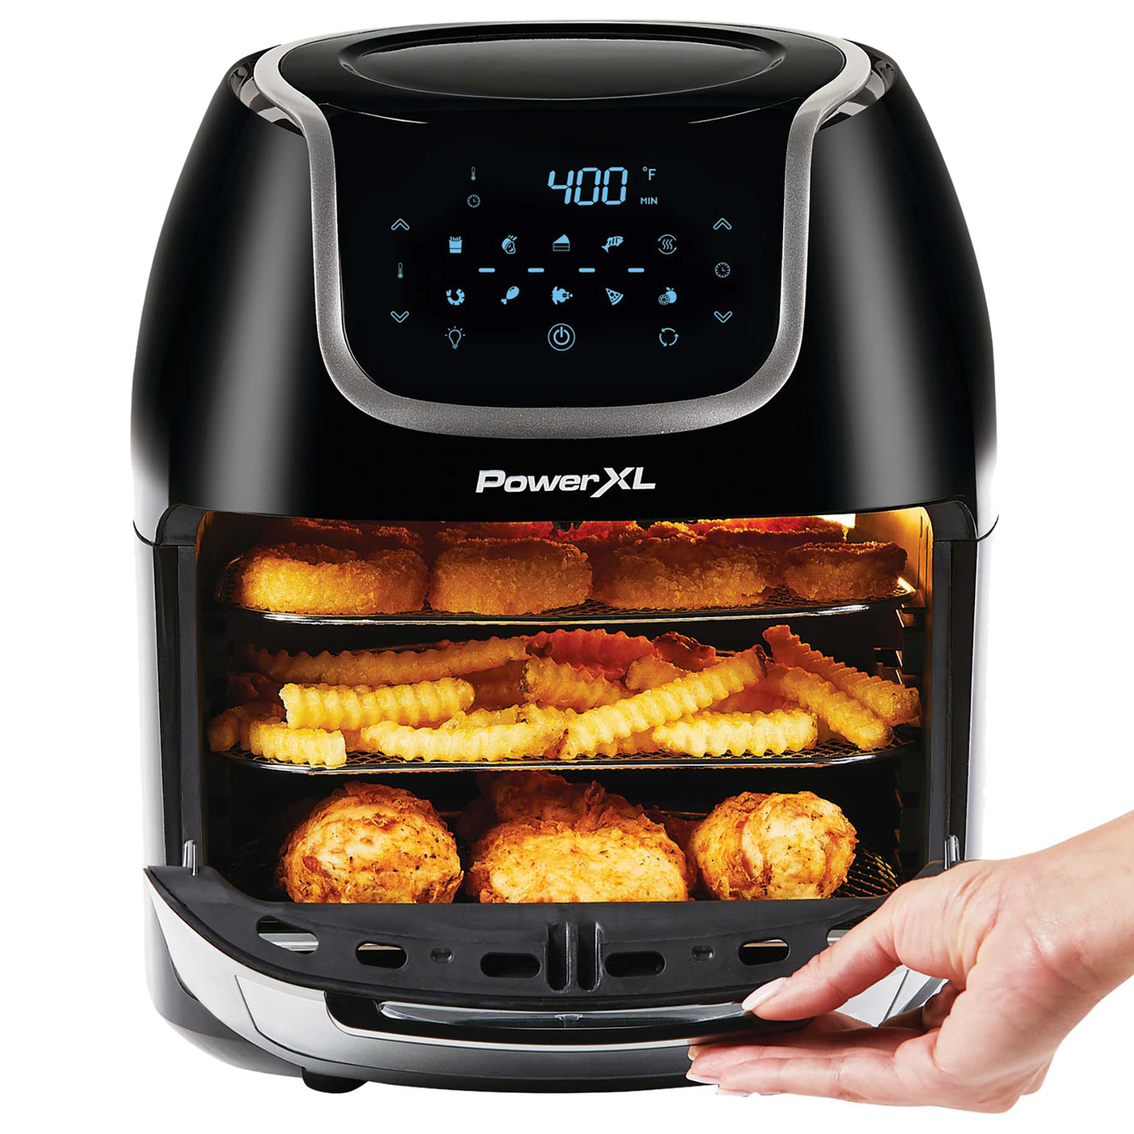 Tutorial : How to use the Power XL Vortex Air fryer. Let's share a recipe!!  😄 